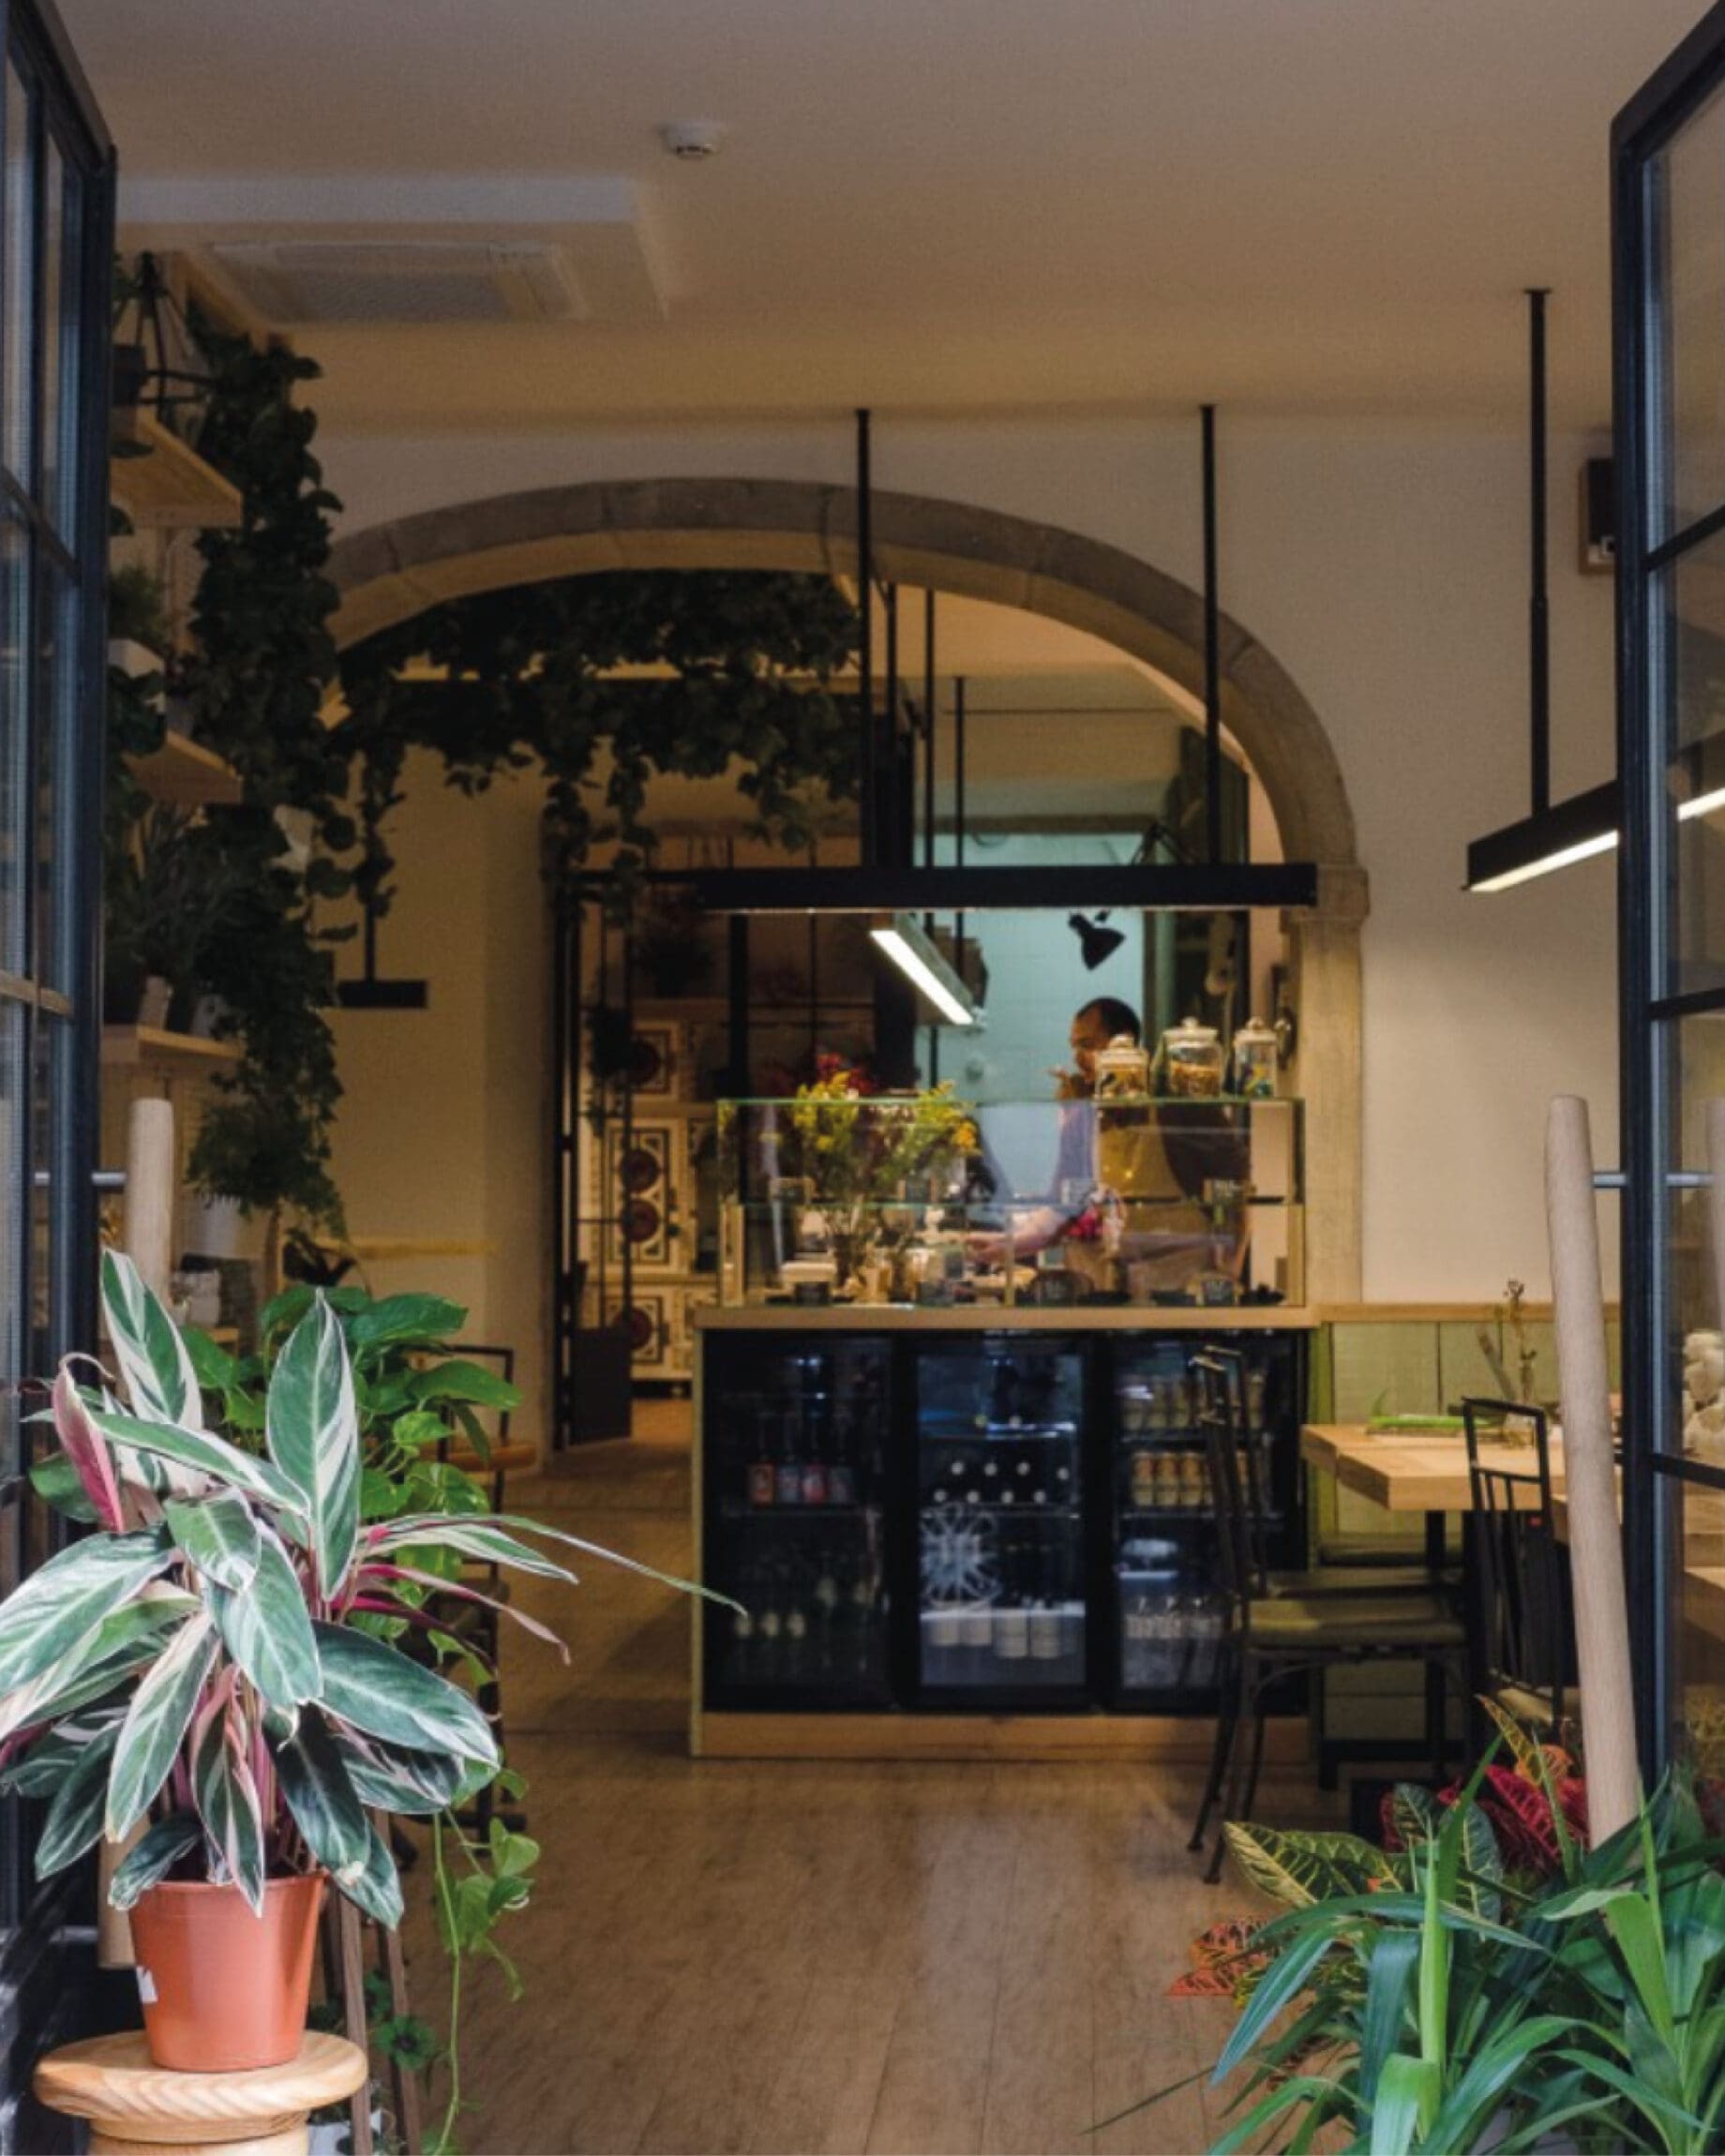 The best cafes for remote working in Lisbon | Interiors at Stanislav Brunch, a Russian-inspired cafe